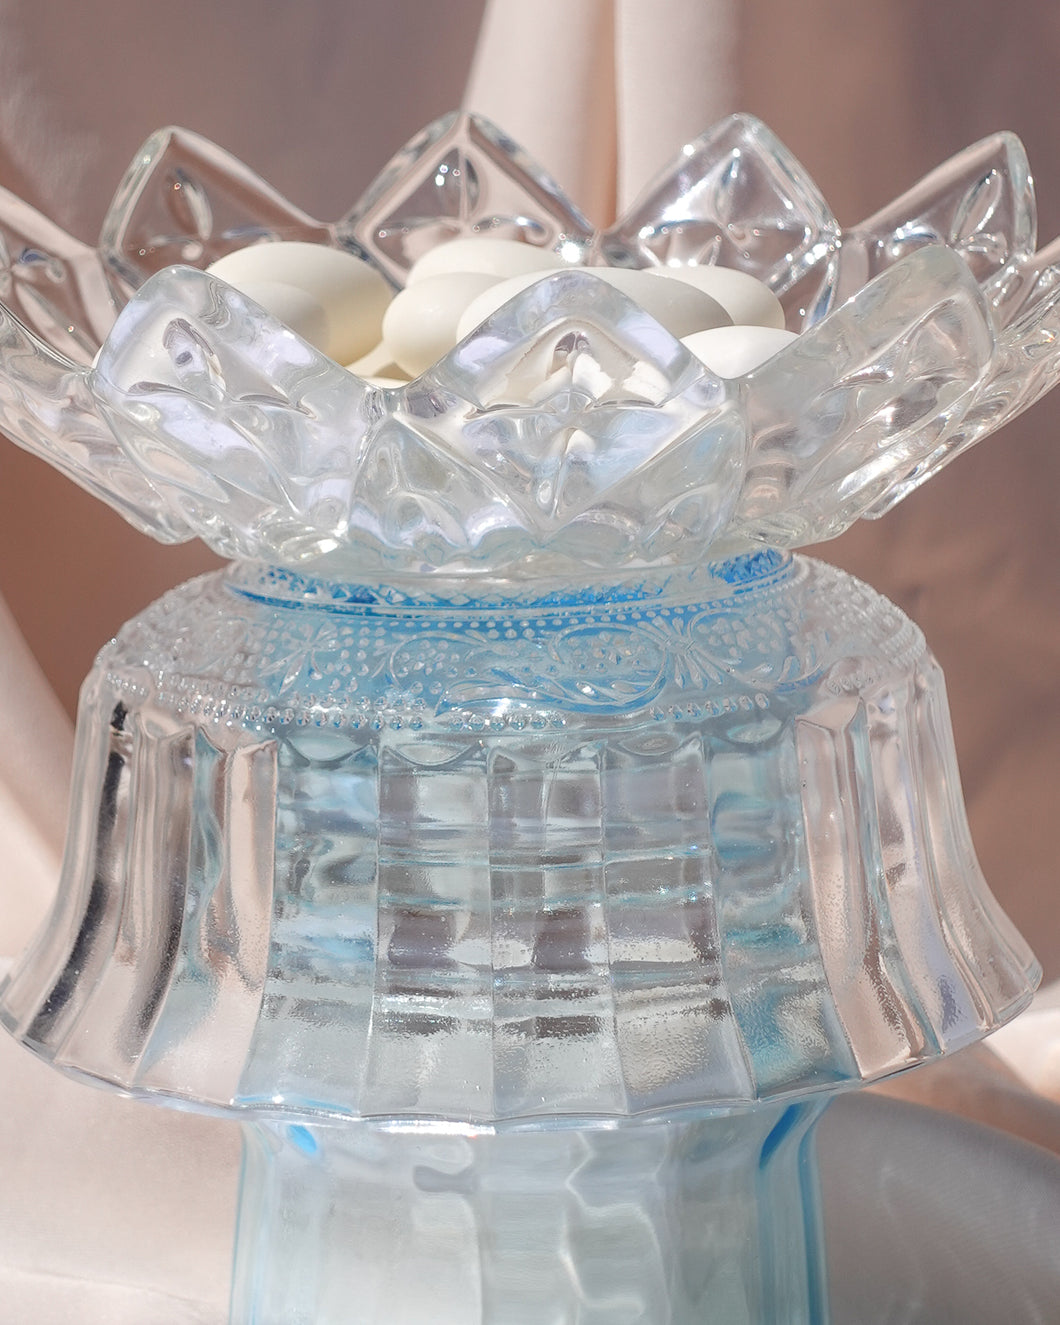 Reversible Turquoise Centerpiece by Opaline Atelier